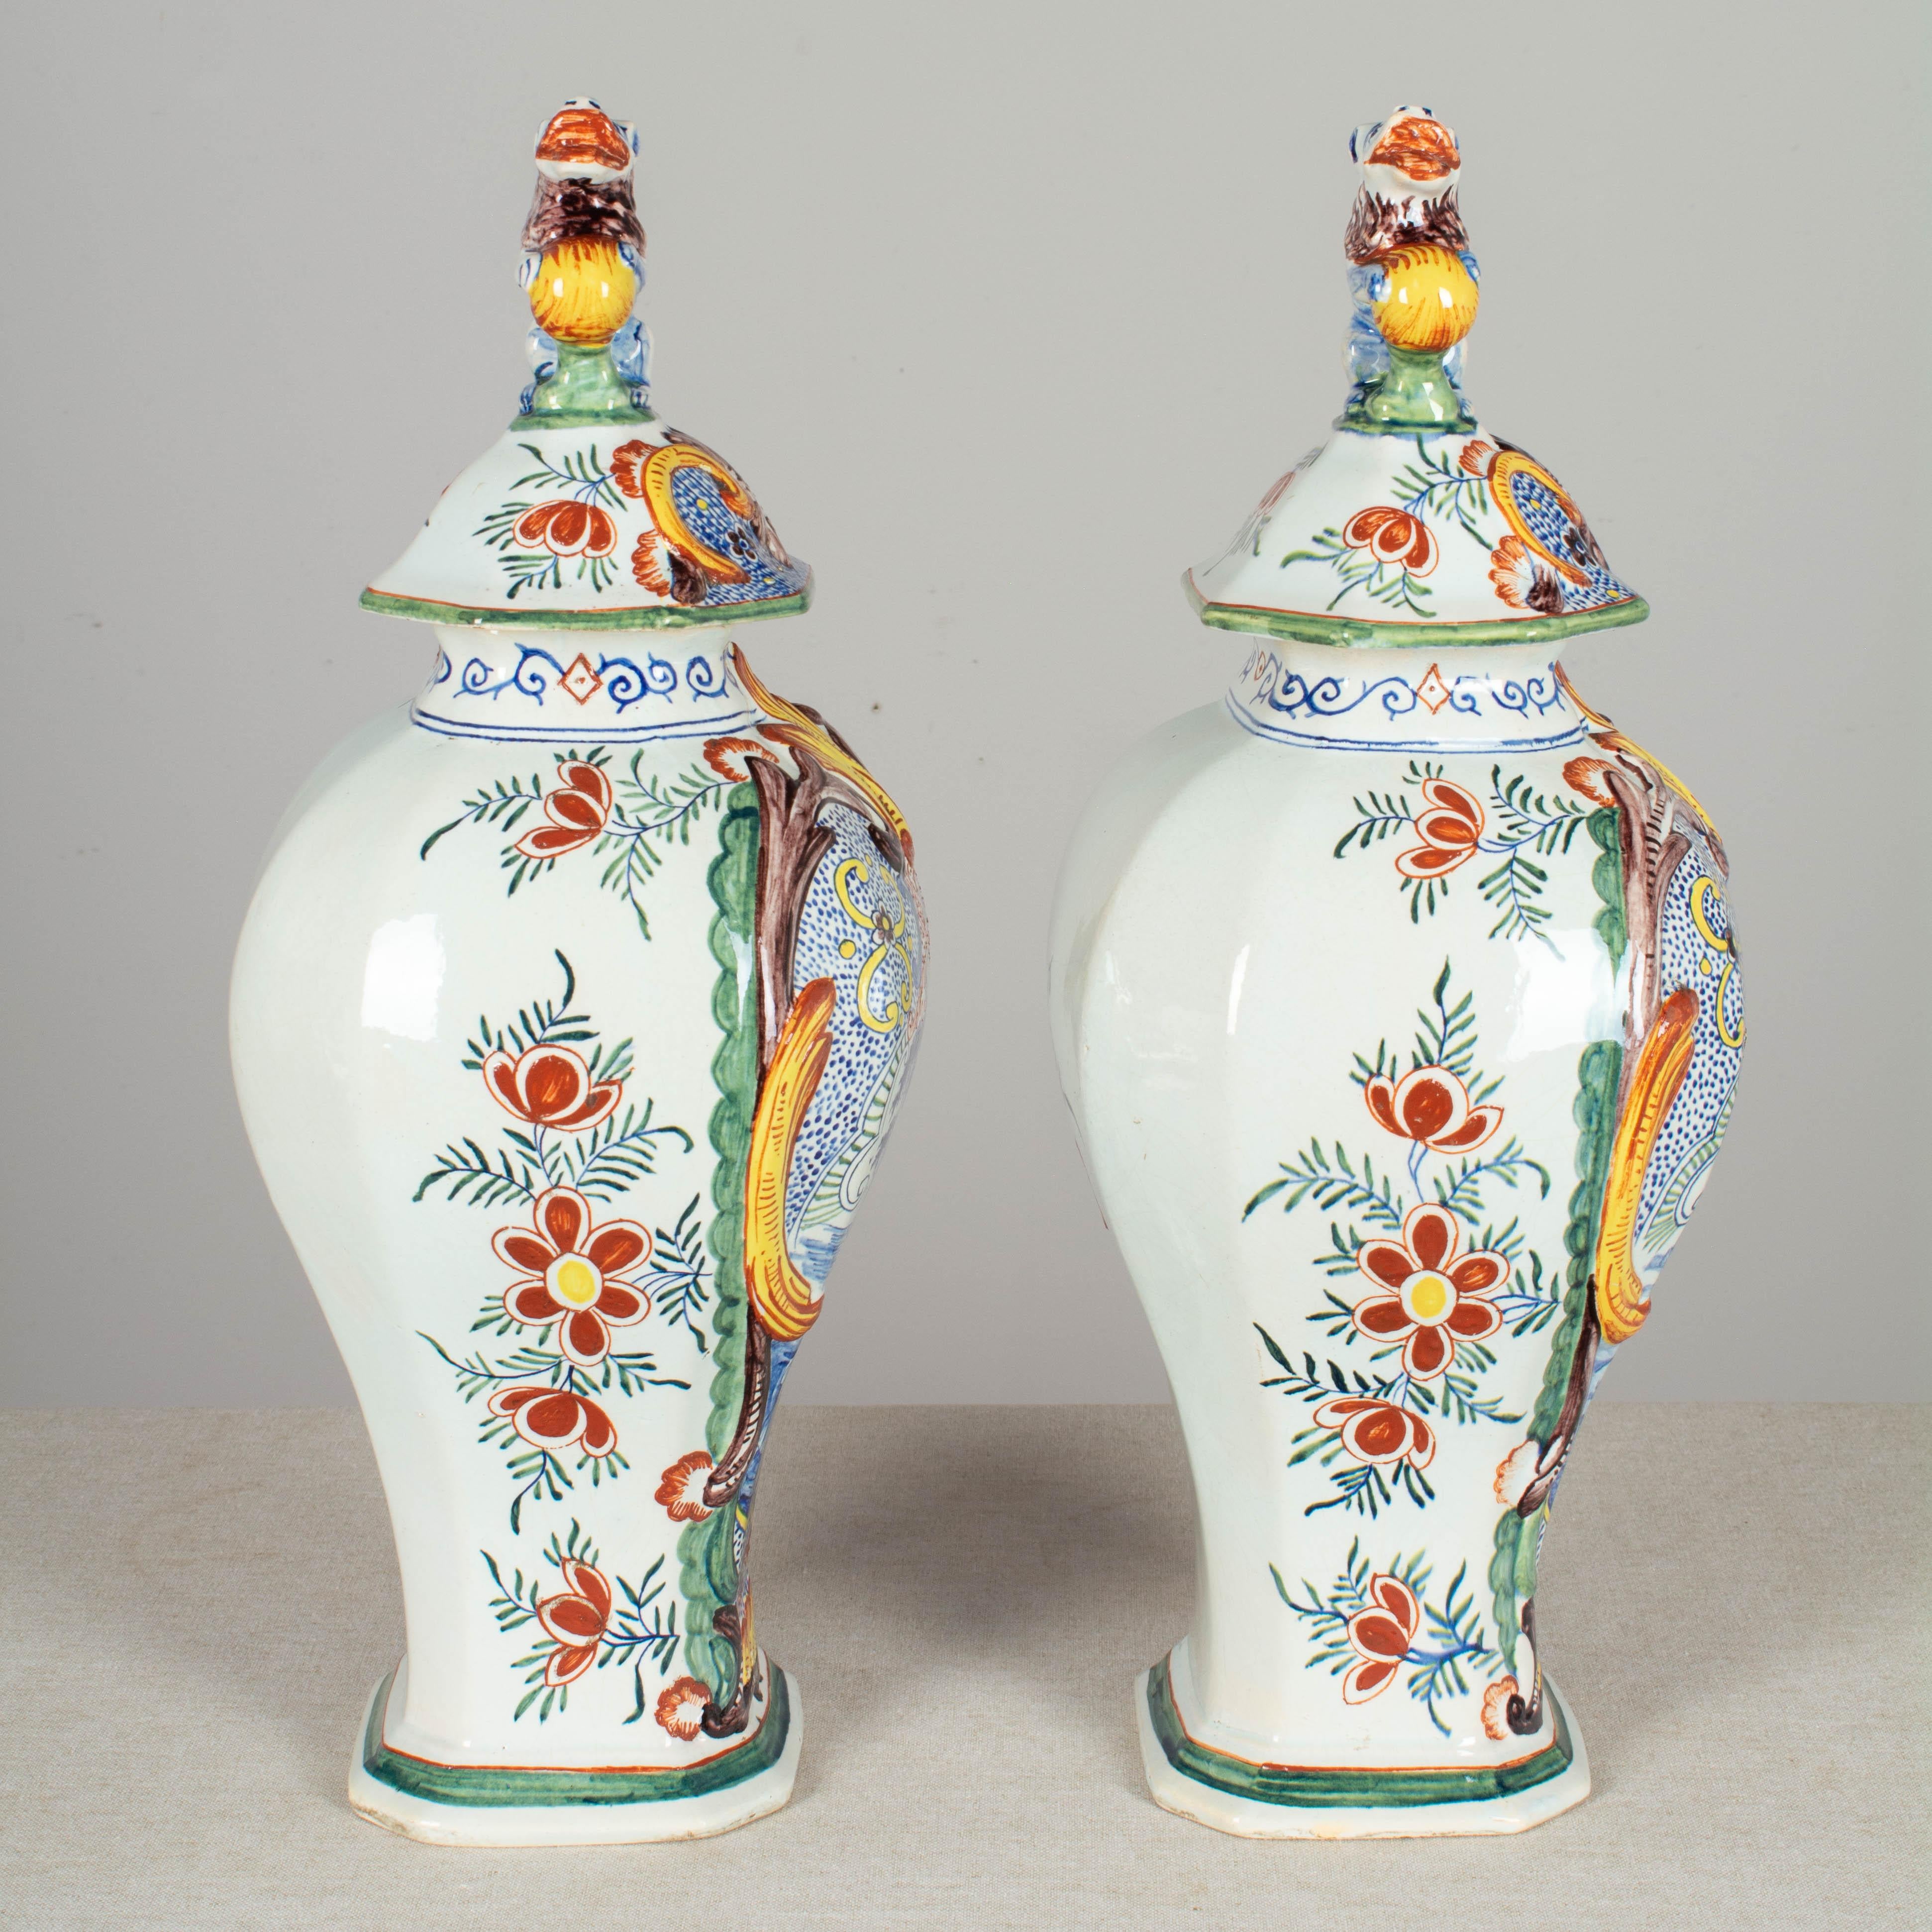 Hand-Painted Pair of 17th Century Delft Polychrome Faience Jars